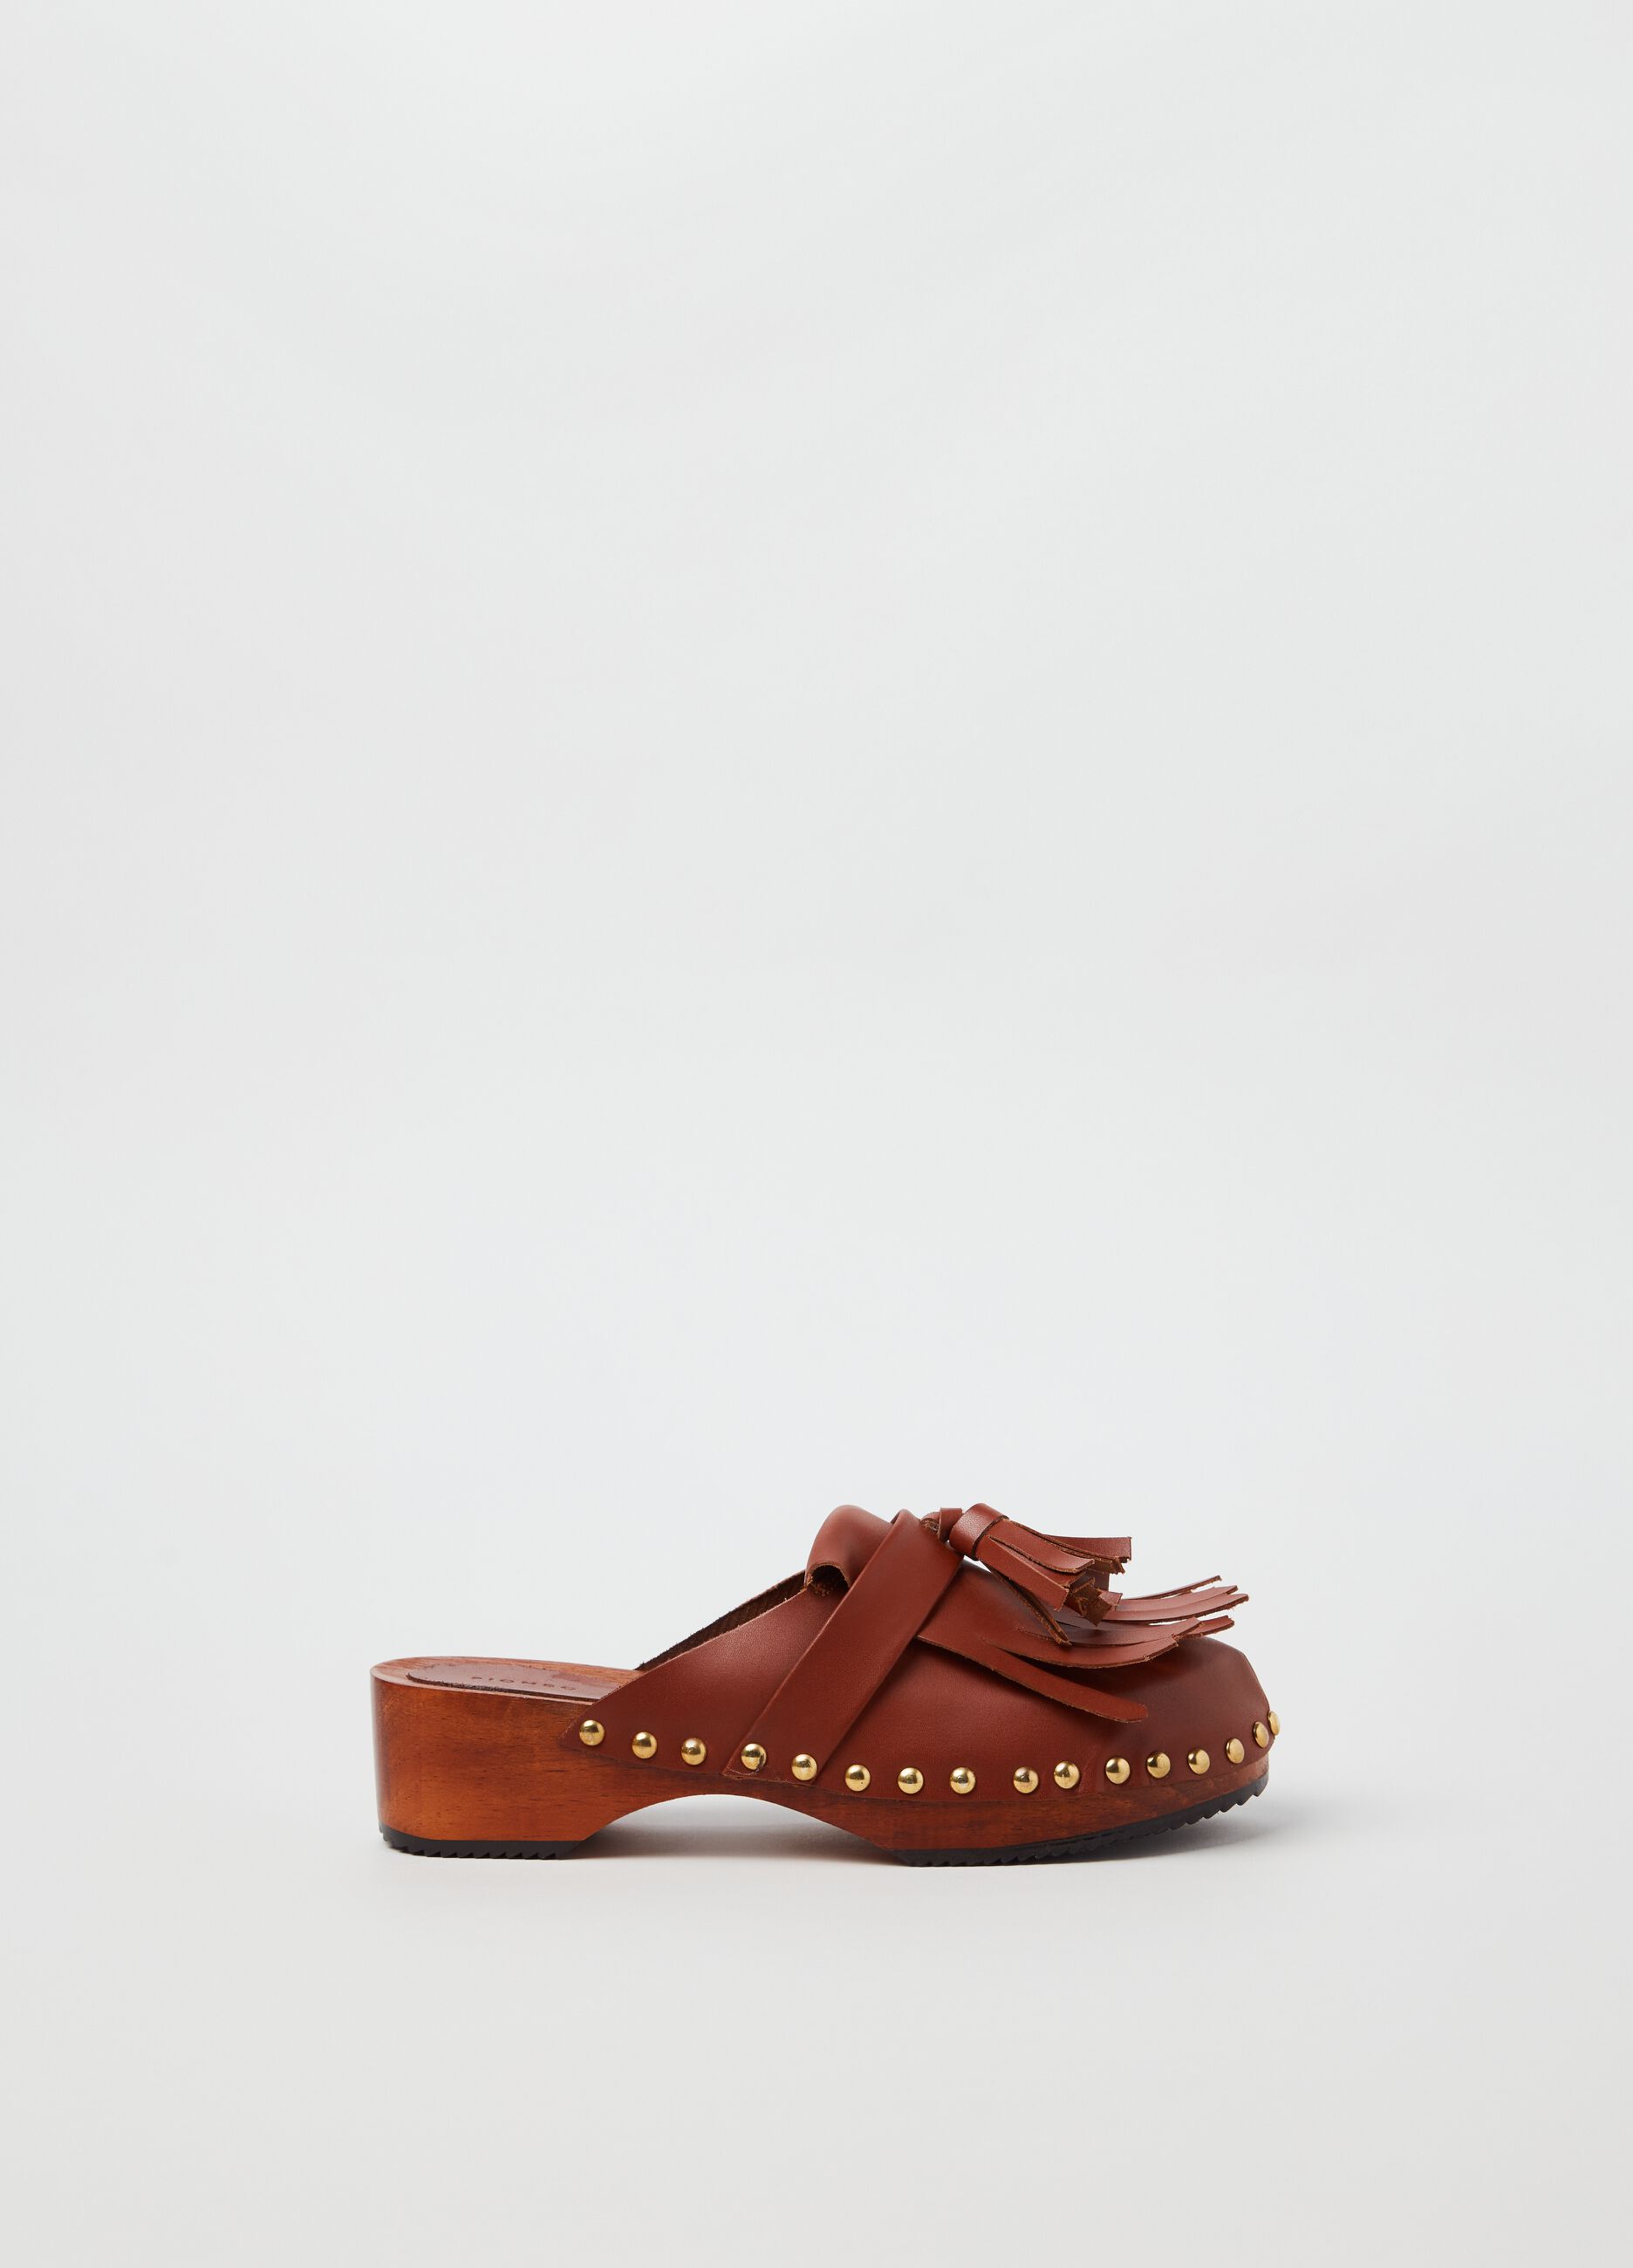 Leather clogs with fringe